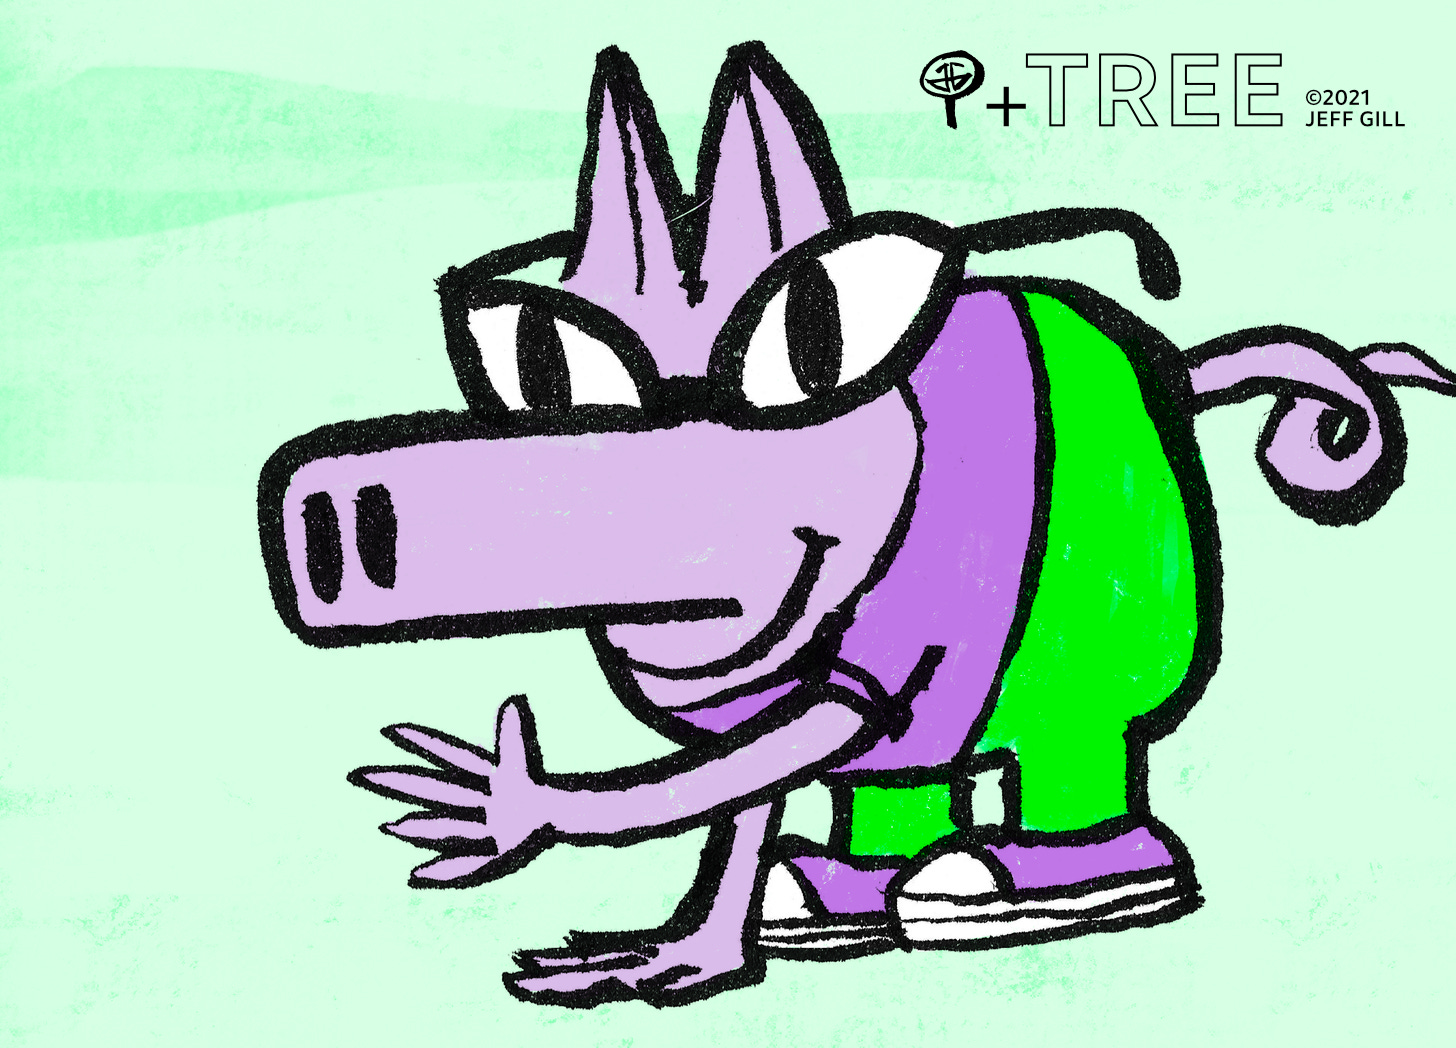 An illustration of a pig. The pig is wearing cat’s eye glasses, a lavender shirt, bright green trousers and low top Converse All Stars. He has human hands, one of which is extended as if to shake hands with someone’. The other is in its expected place on the floor.